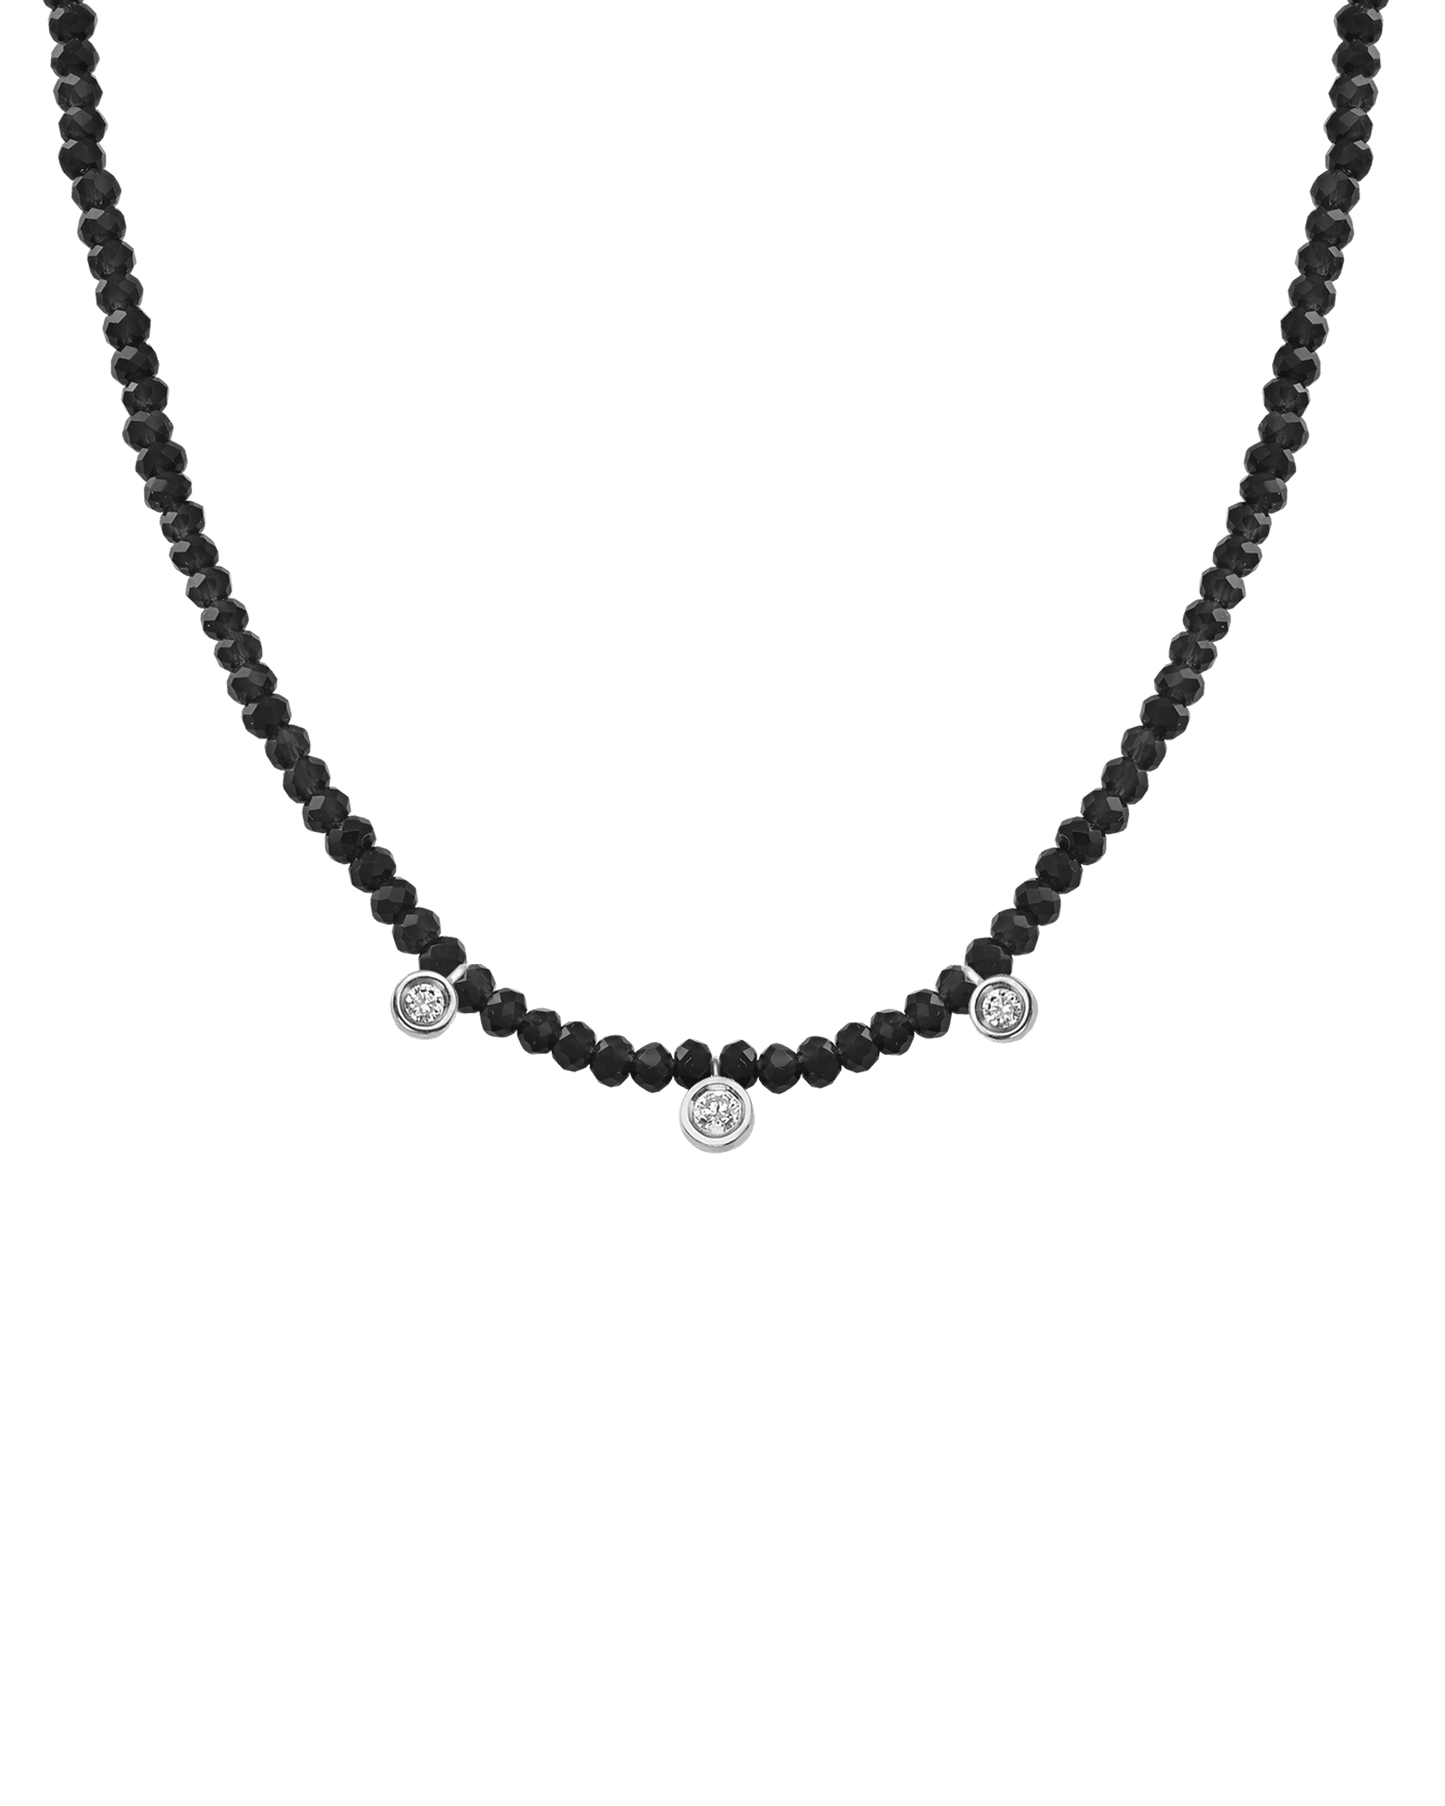 Black Spinel Gemstone & Three diamonds Necklace - 14K Yellow Gold Necklaces magal-dev 